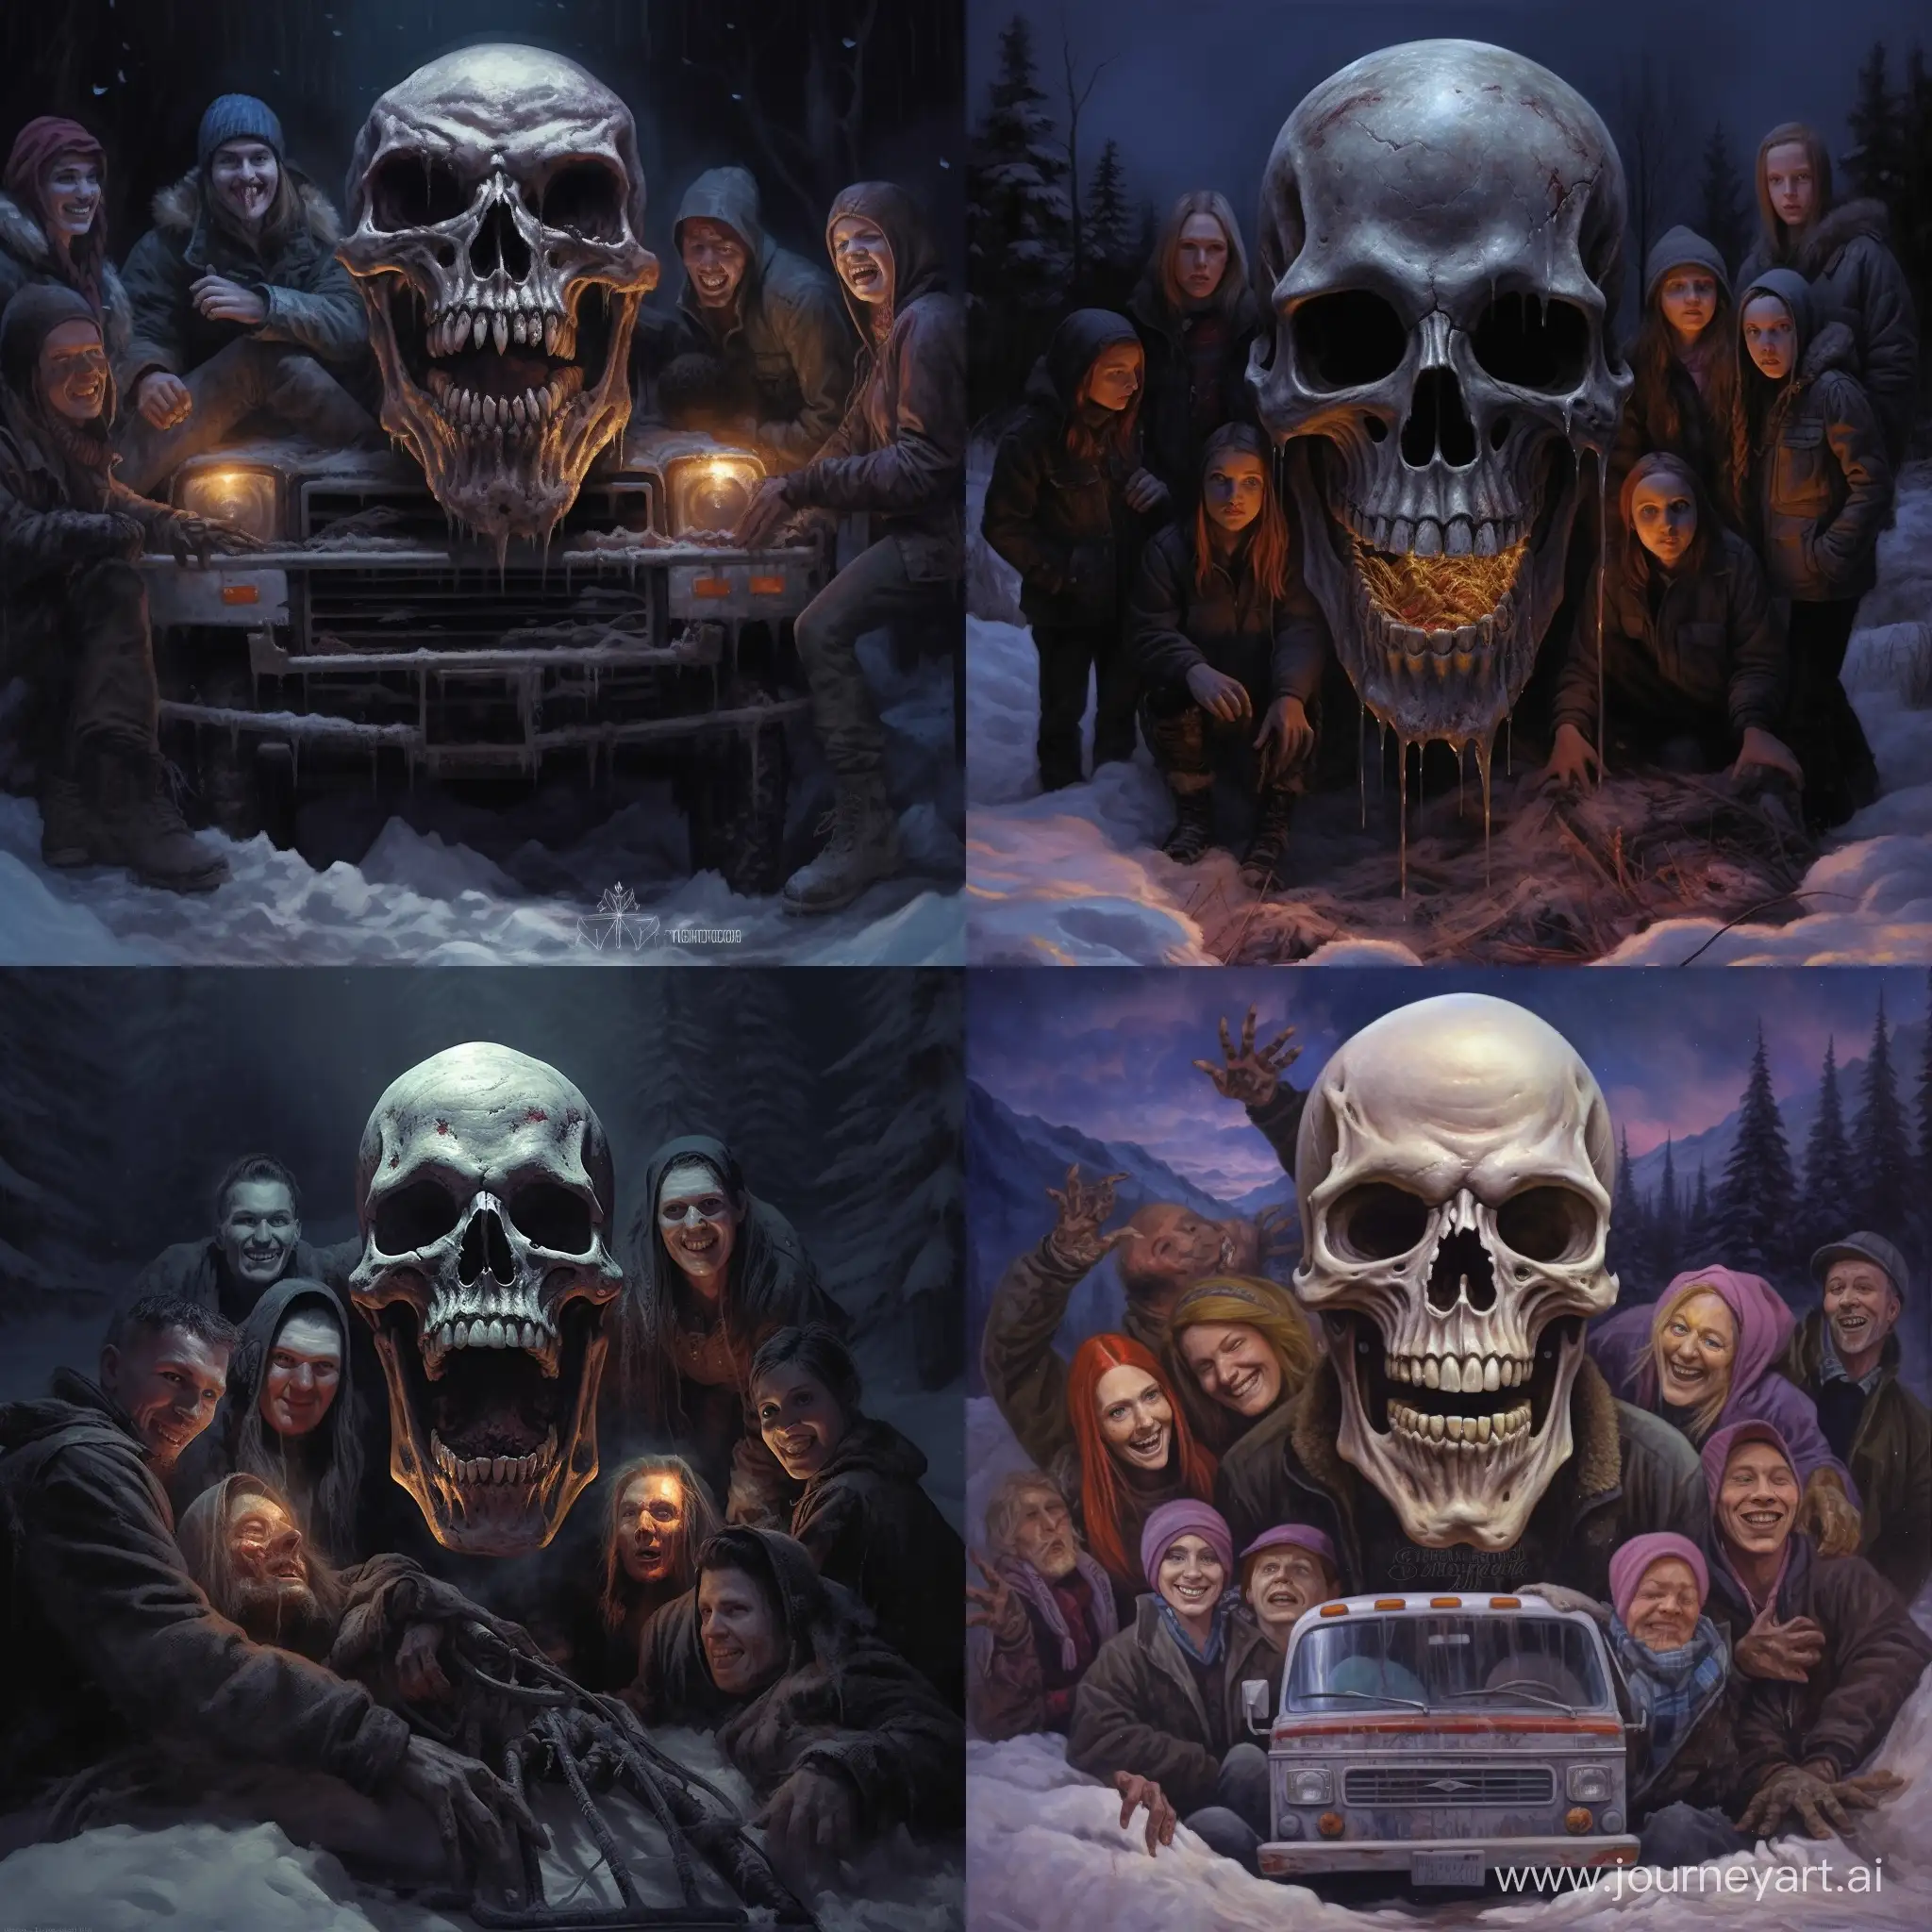 Eerie-Night-Encounter-Sinister-Skulls-Amidst-Tourists-and-Mystery